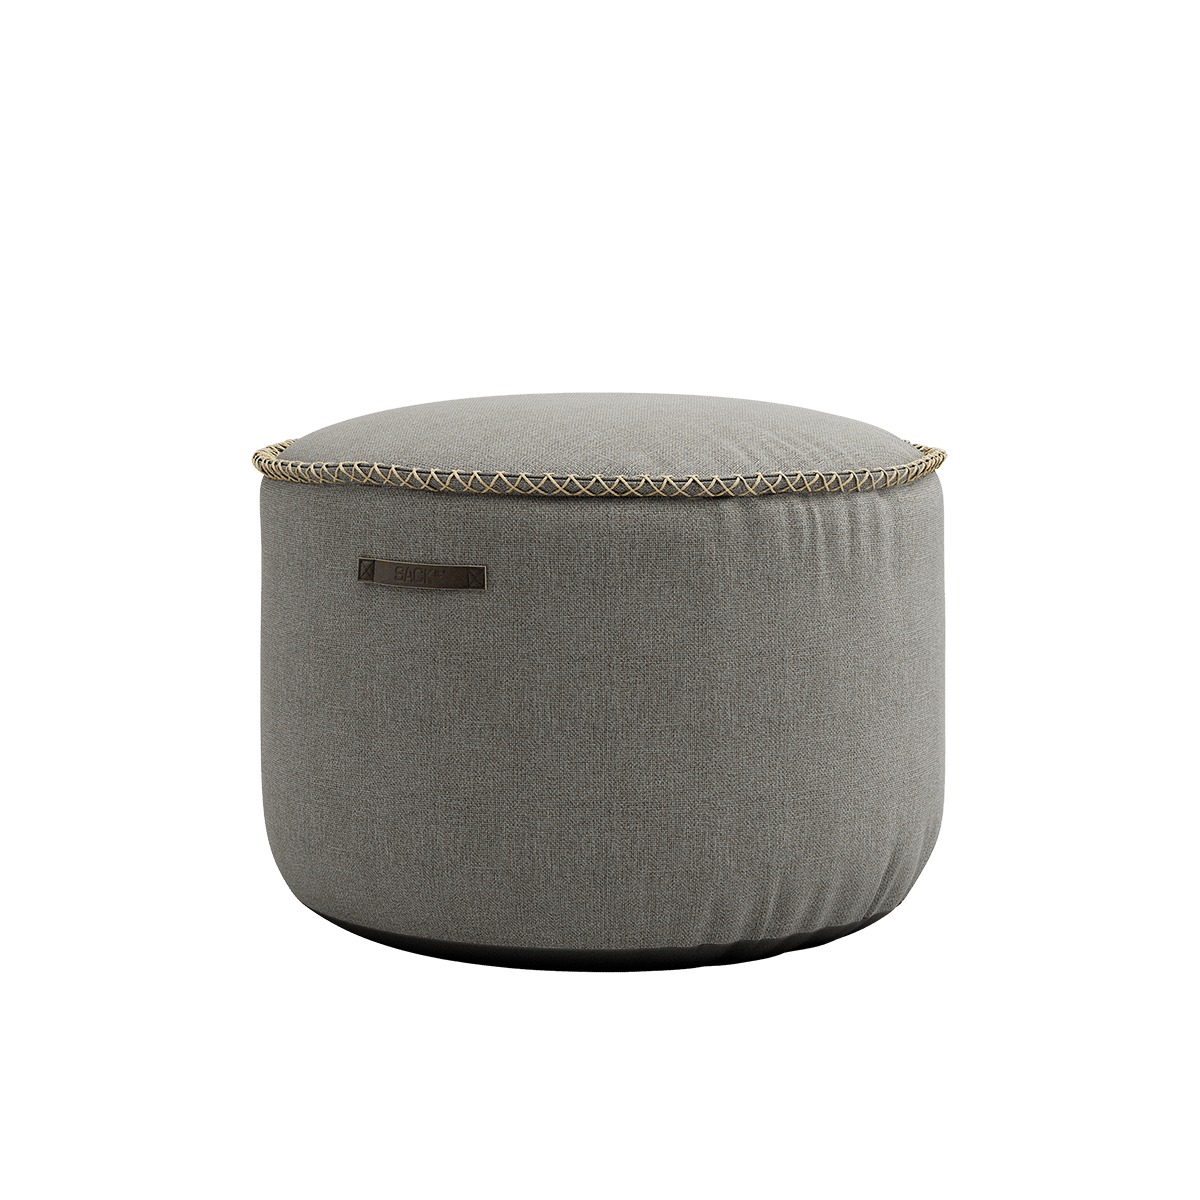 variant_8567016% | Medley Pouf [Contract] - Medley Grey | SACKit